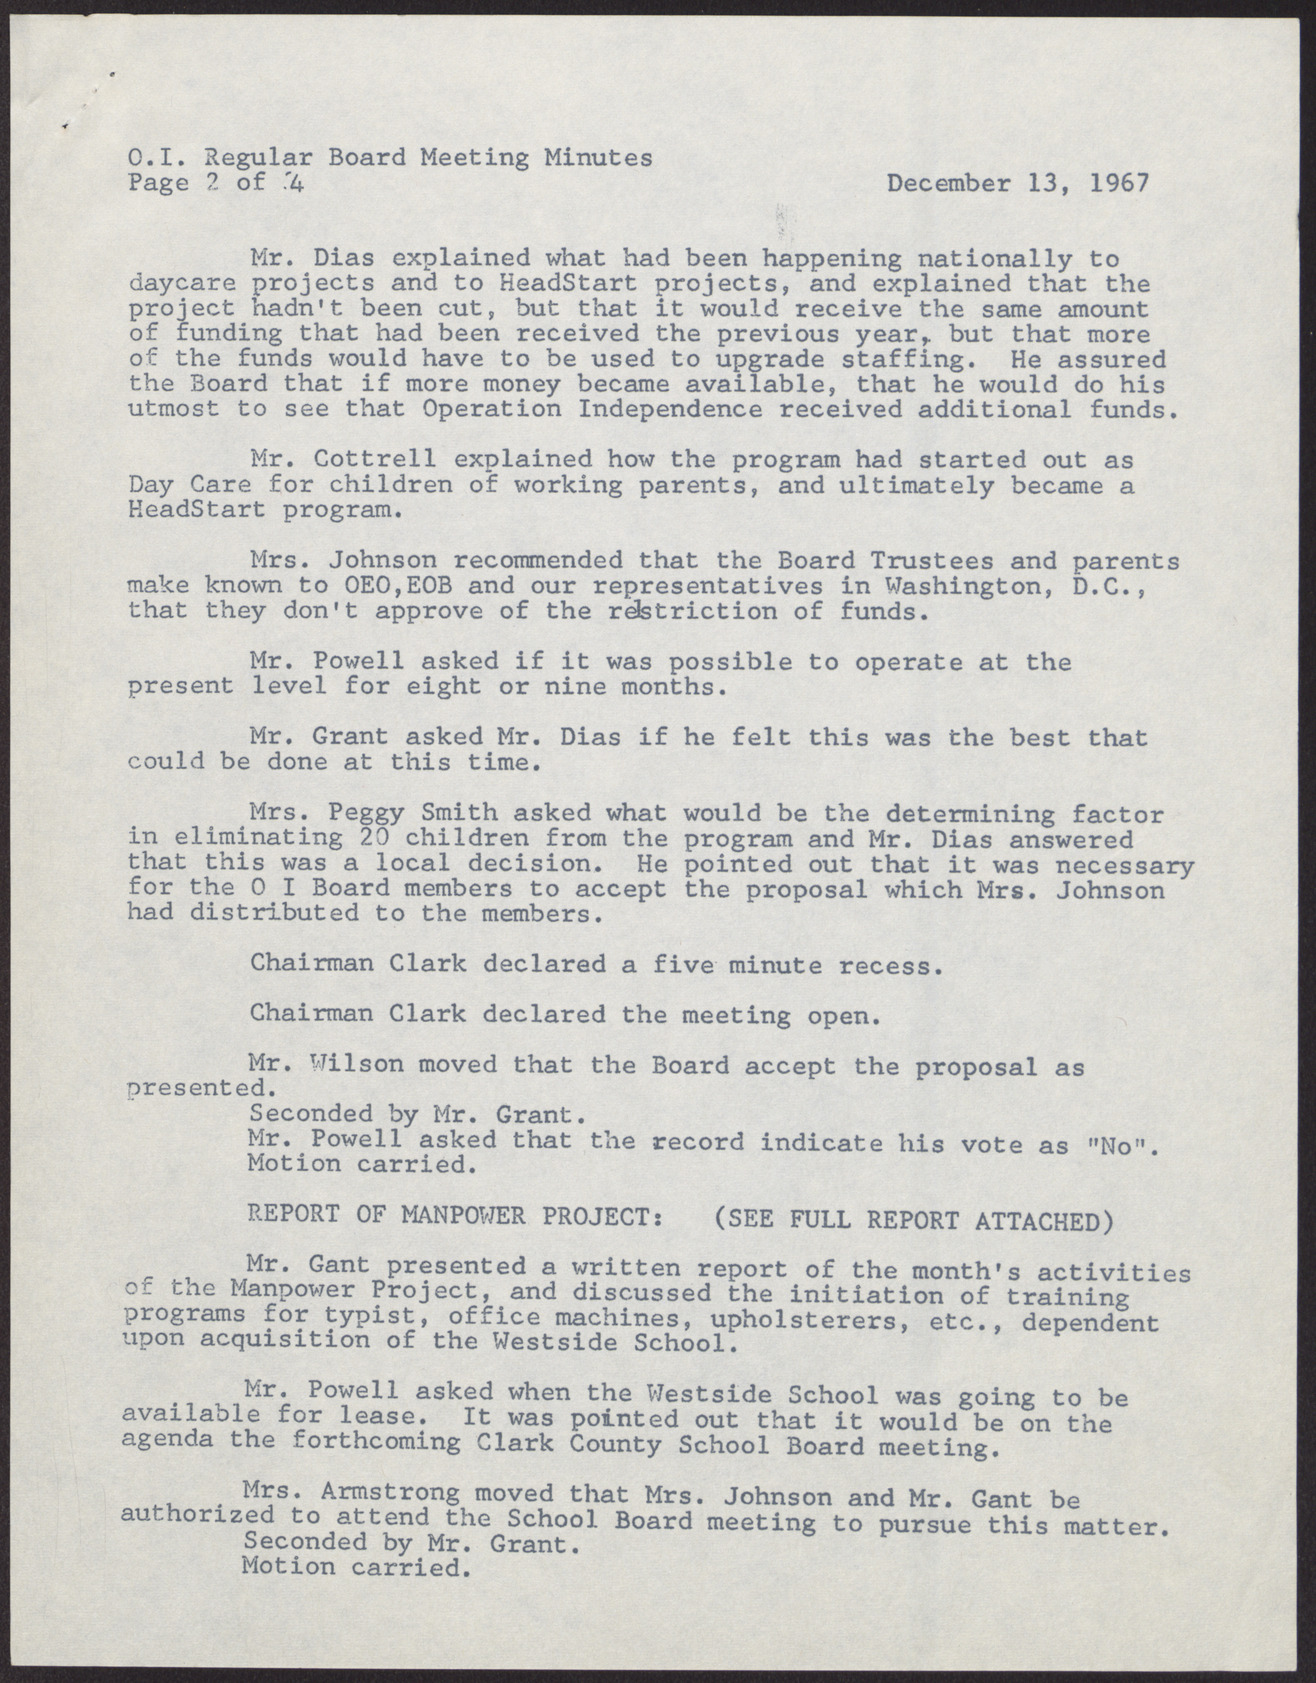 Minutes of Operation Independence Regular Board Meeting (4 pages), December 13, 1967, page 2